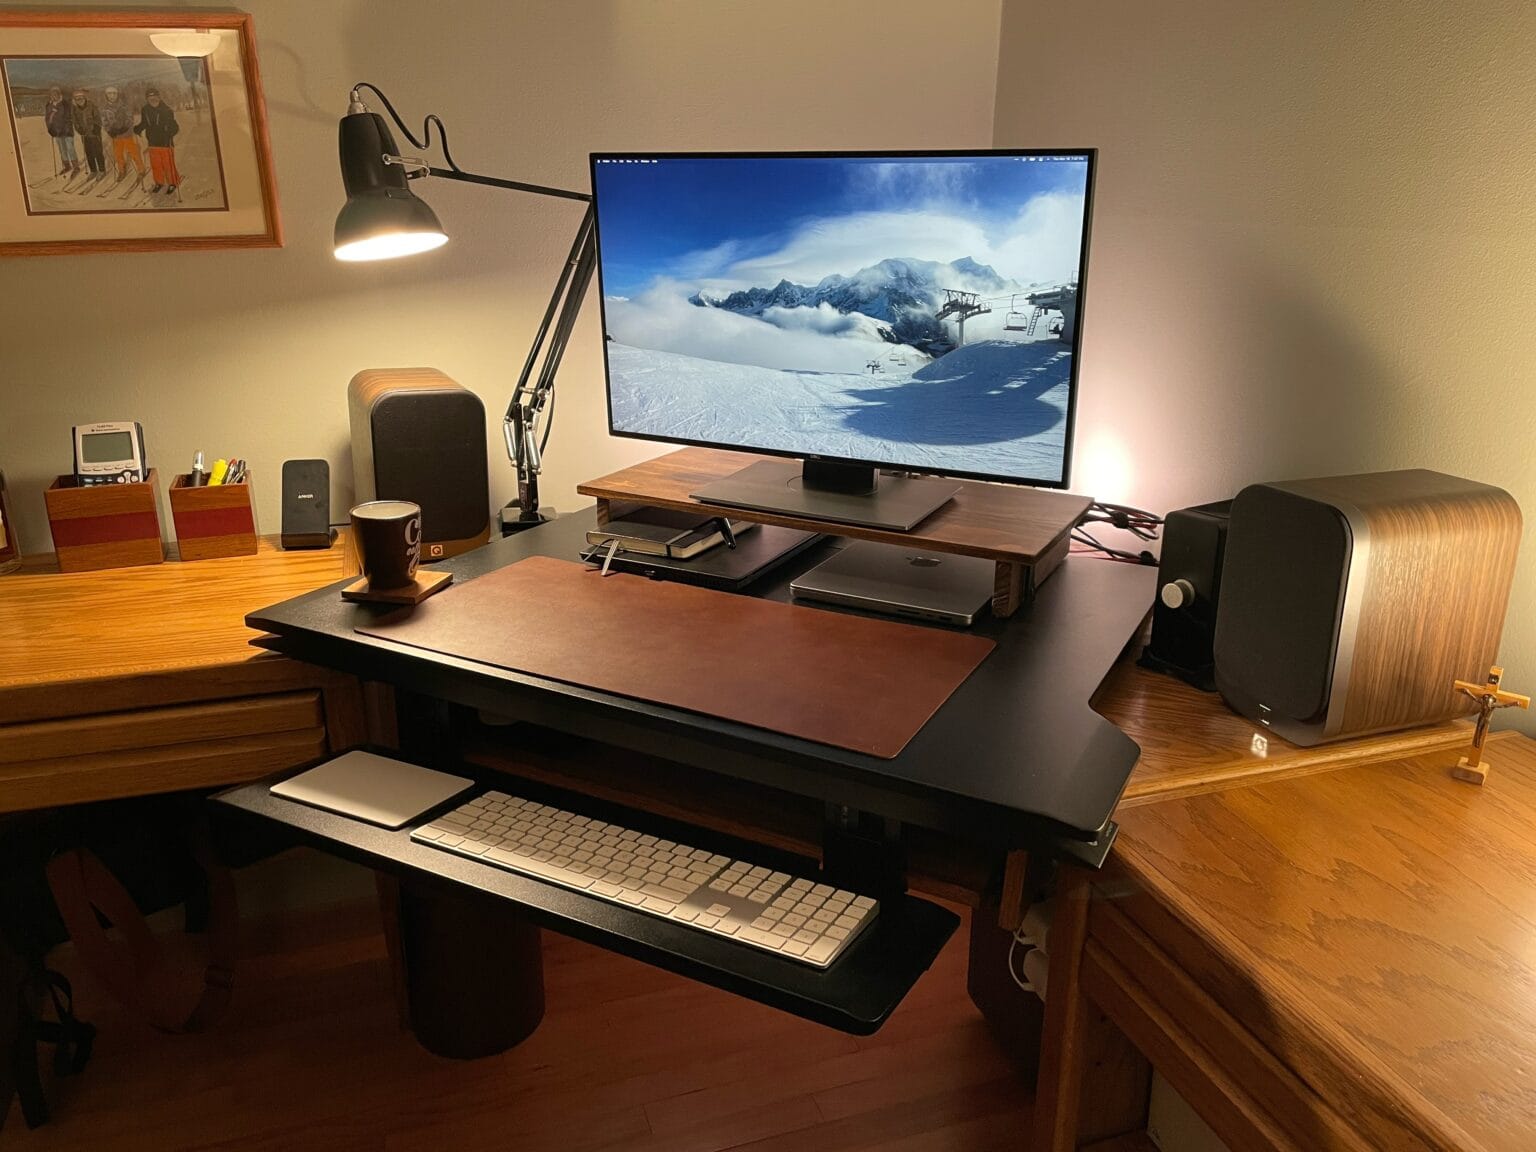 This M1 Pro MacBook setup uses a 27-inch Dell monitor and a pumped-up audio rig.